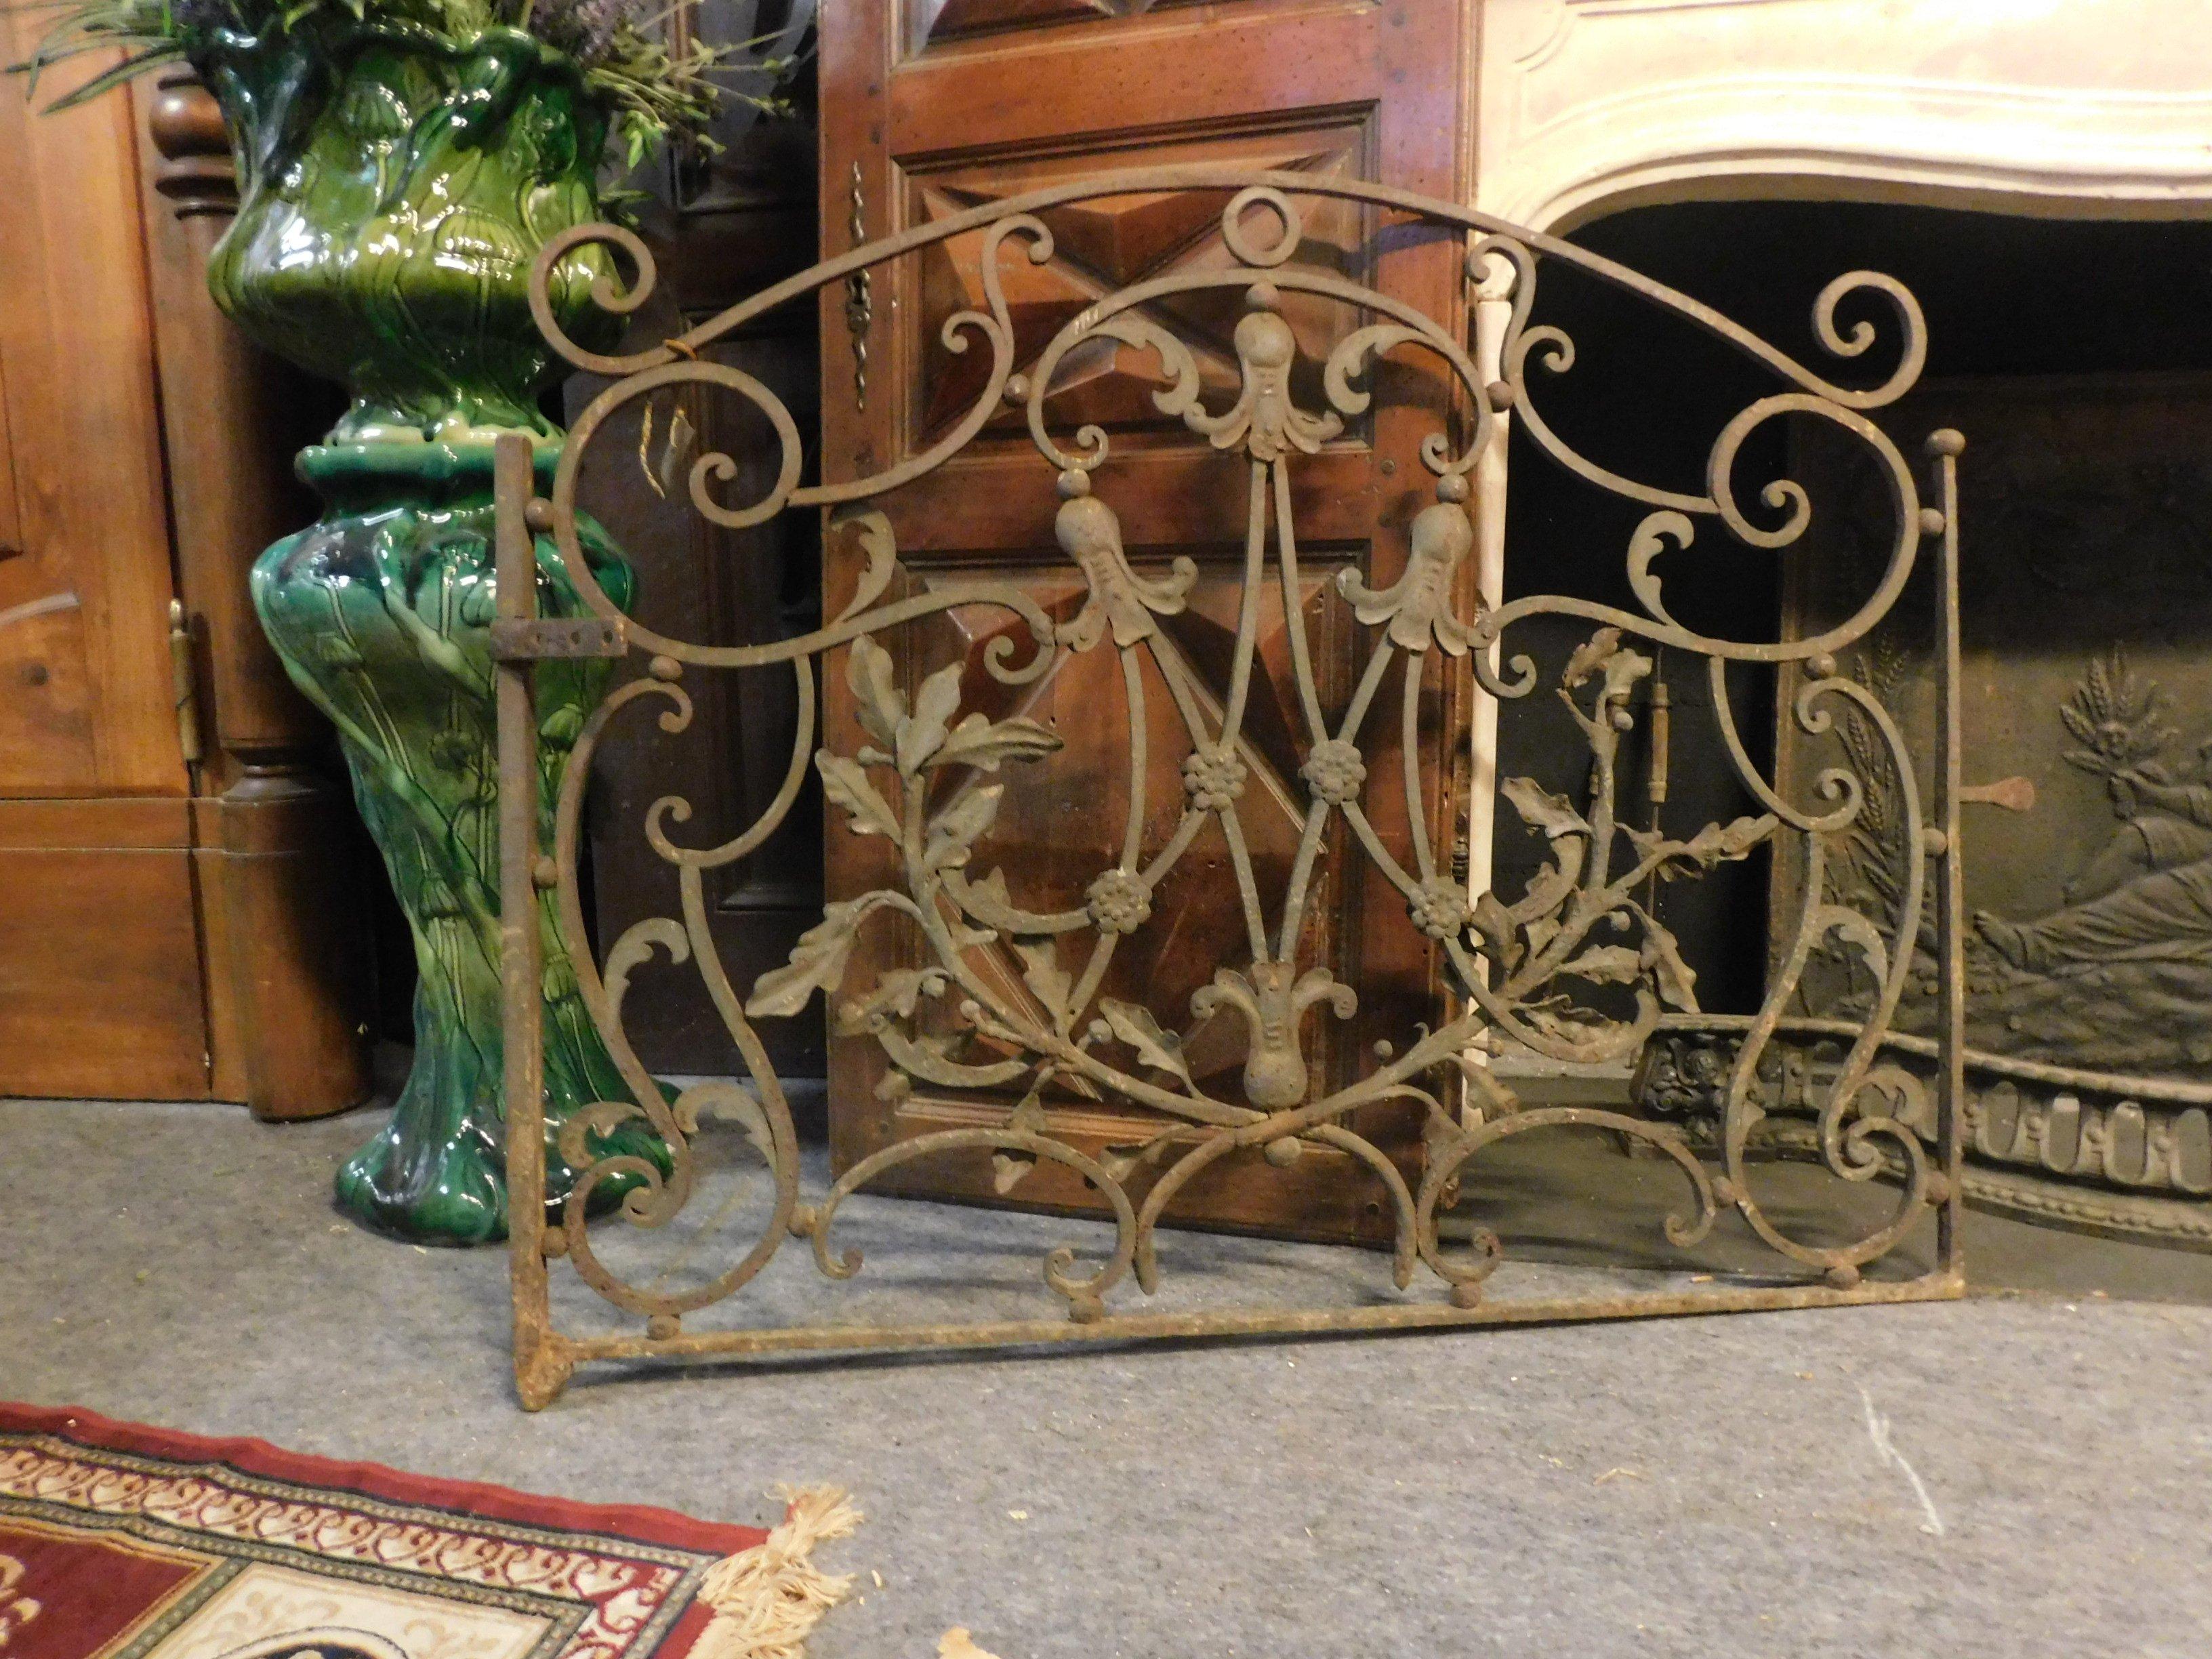 Ancient small door in wrought iron, with floral decorations and vaults, coming from an 18th century building in Italy.
Ideal as a small gate, for a niche or an elegant outdoor fence, in a refined garden.
Measure cm W 113 x H 91.